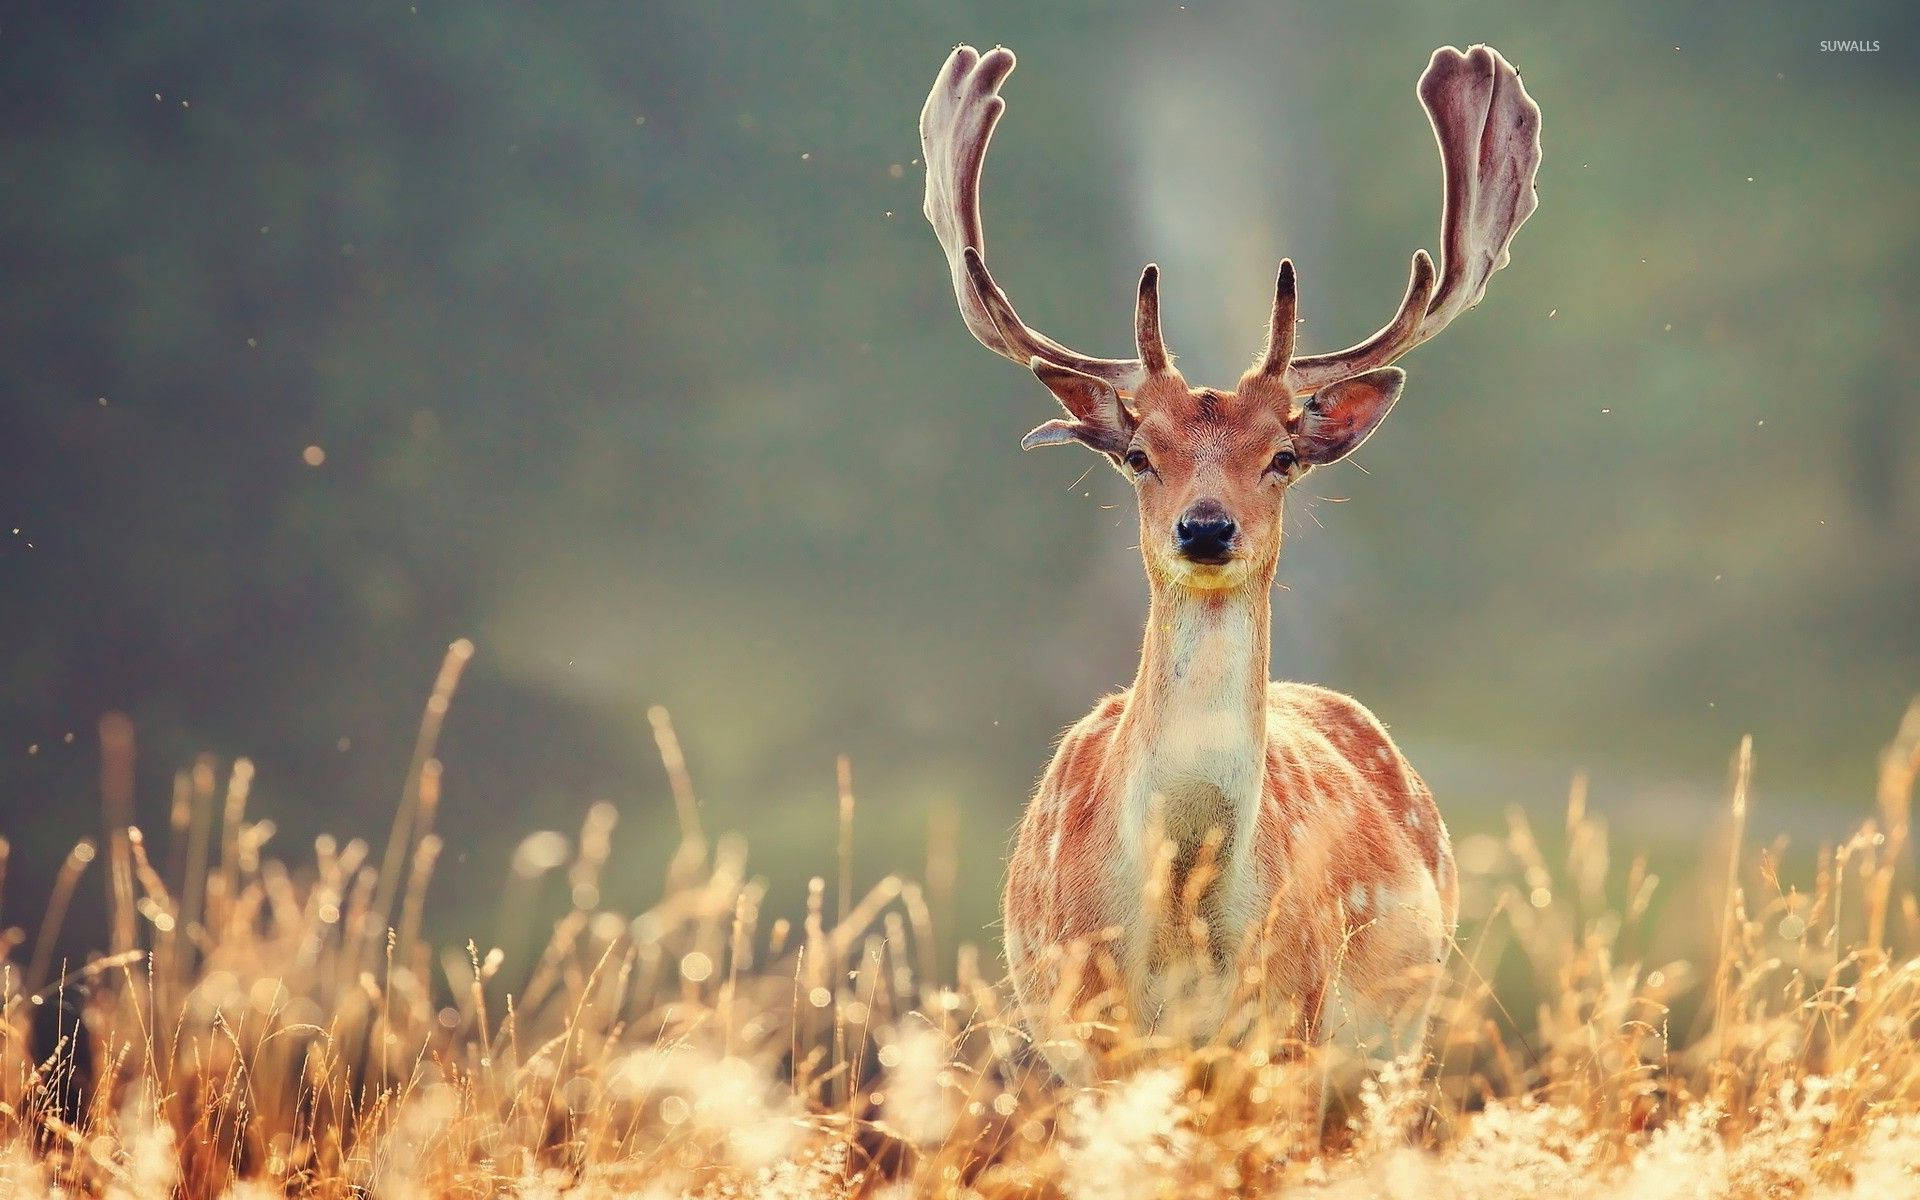 Take In The Majestic Beauty of This Buck In A Field Wallpaper